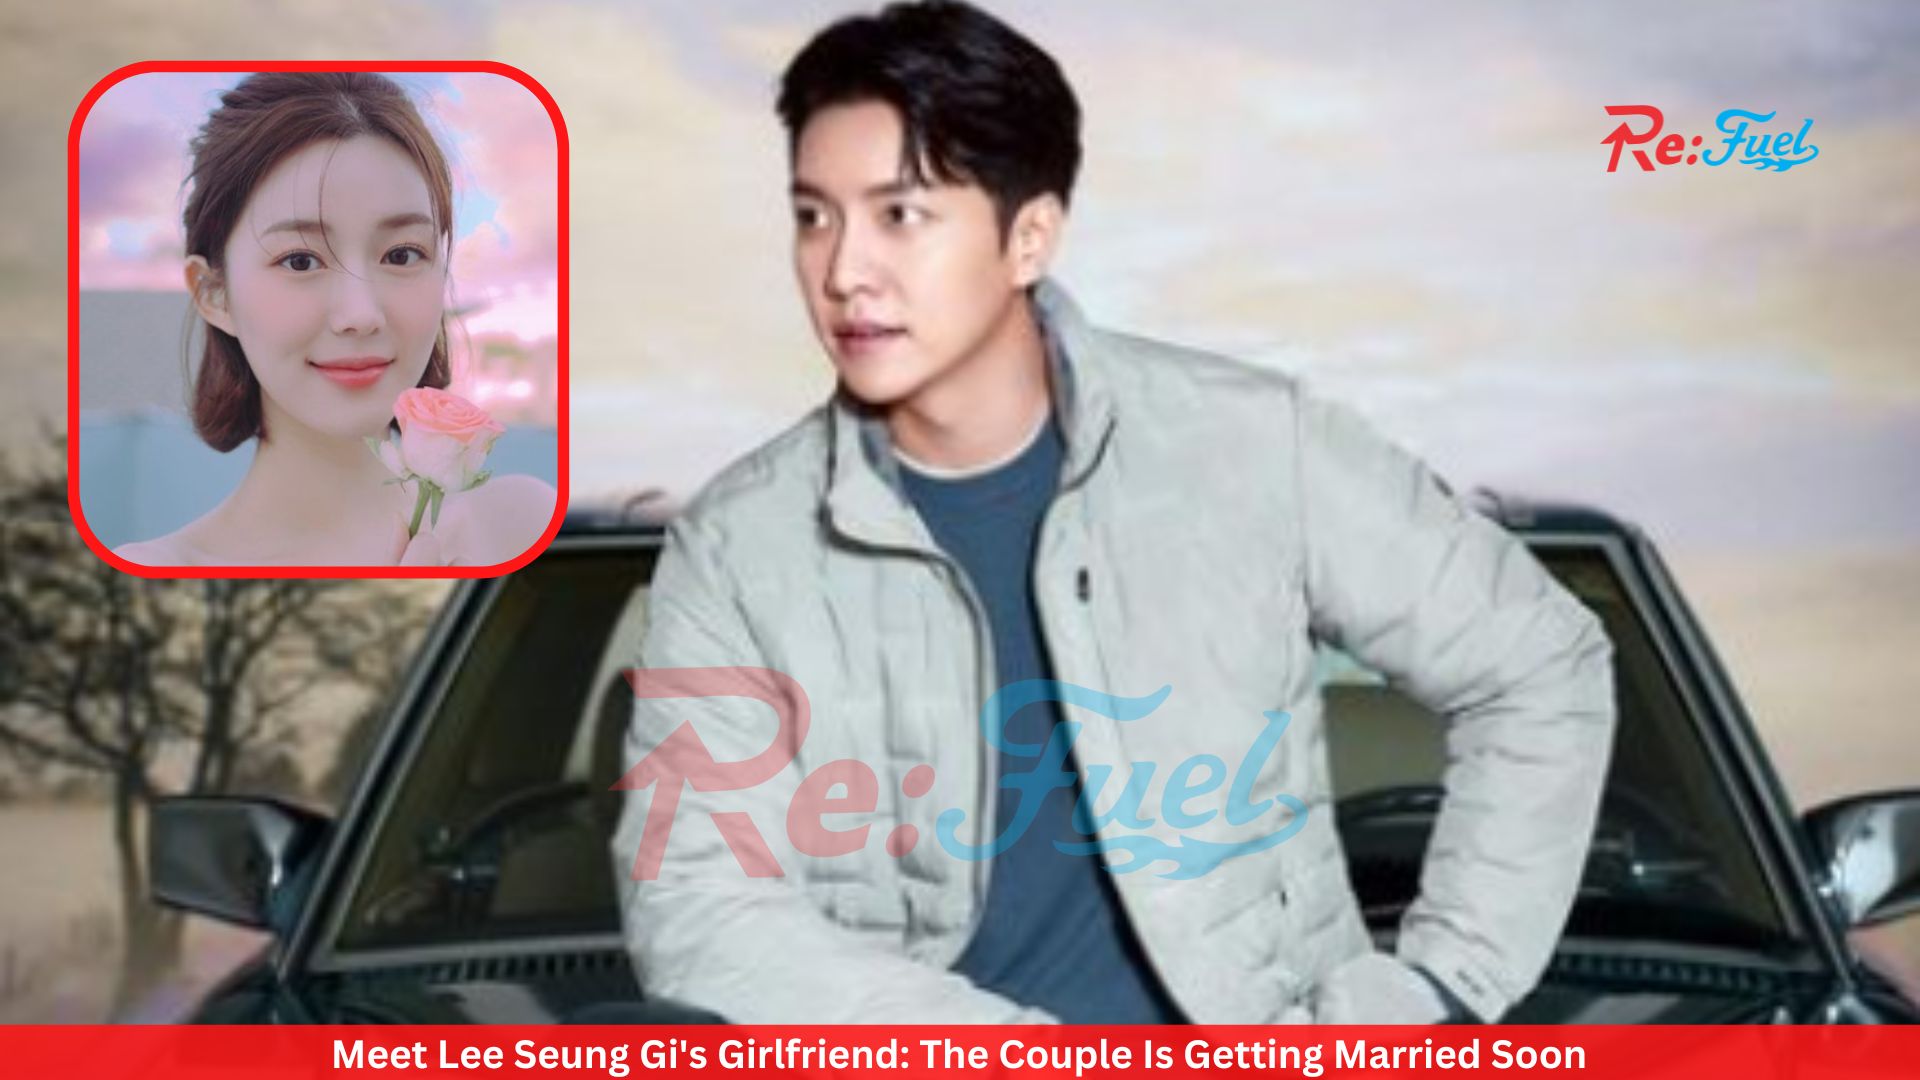 Meet Lee Seung Gi's Girlfriend: The Couple Is Getting Married Soon